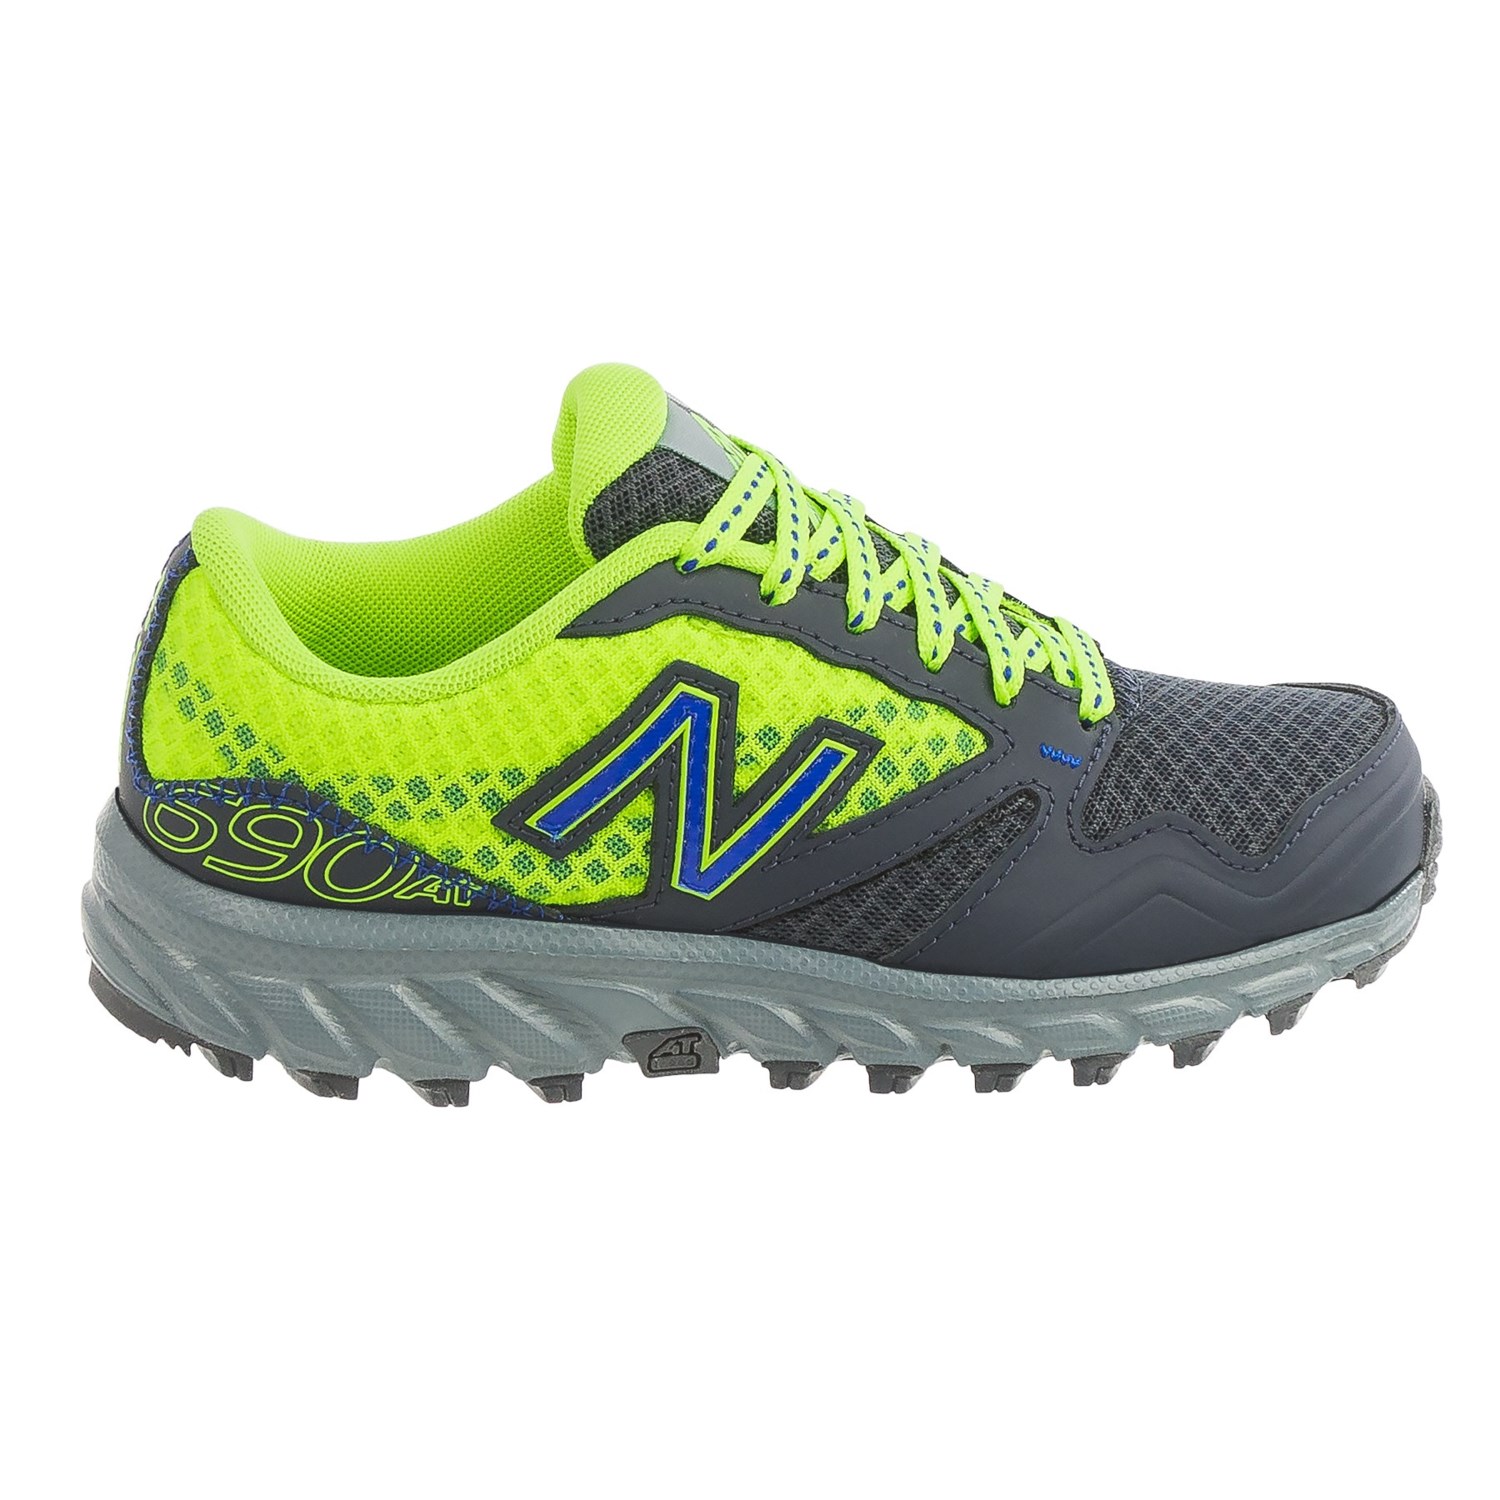 New Balance KT690 Trail Running Shoes (For Little and Big Kids) - Save 45%